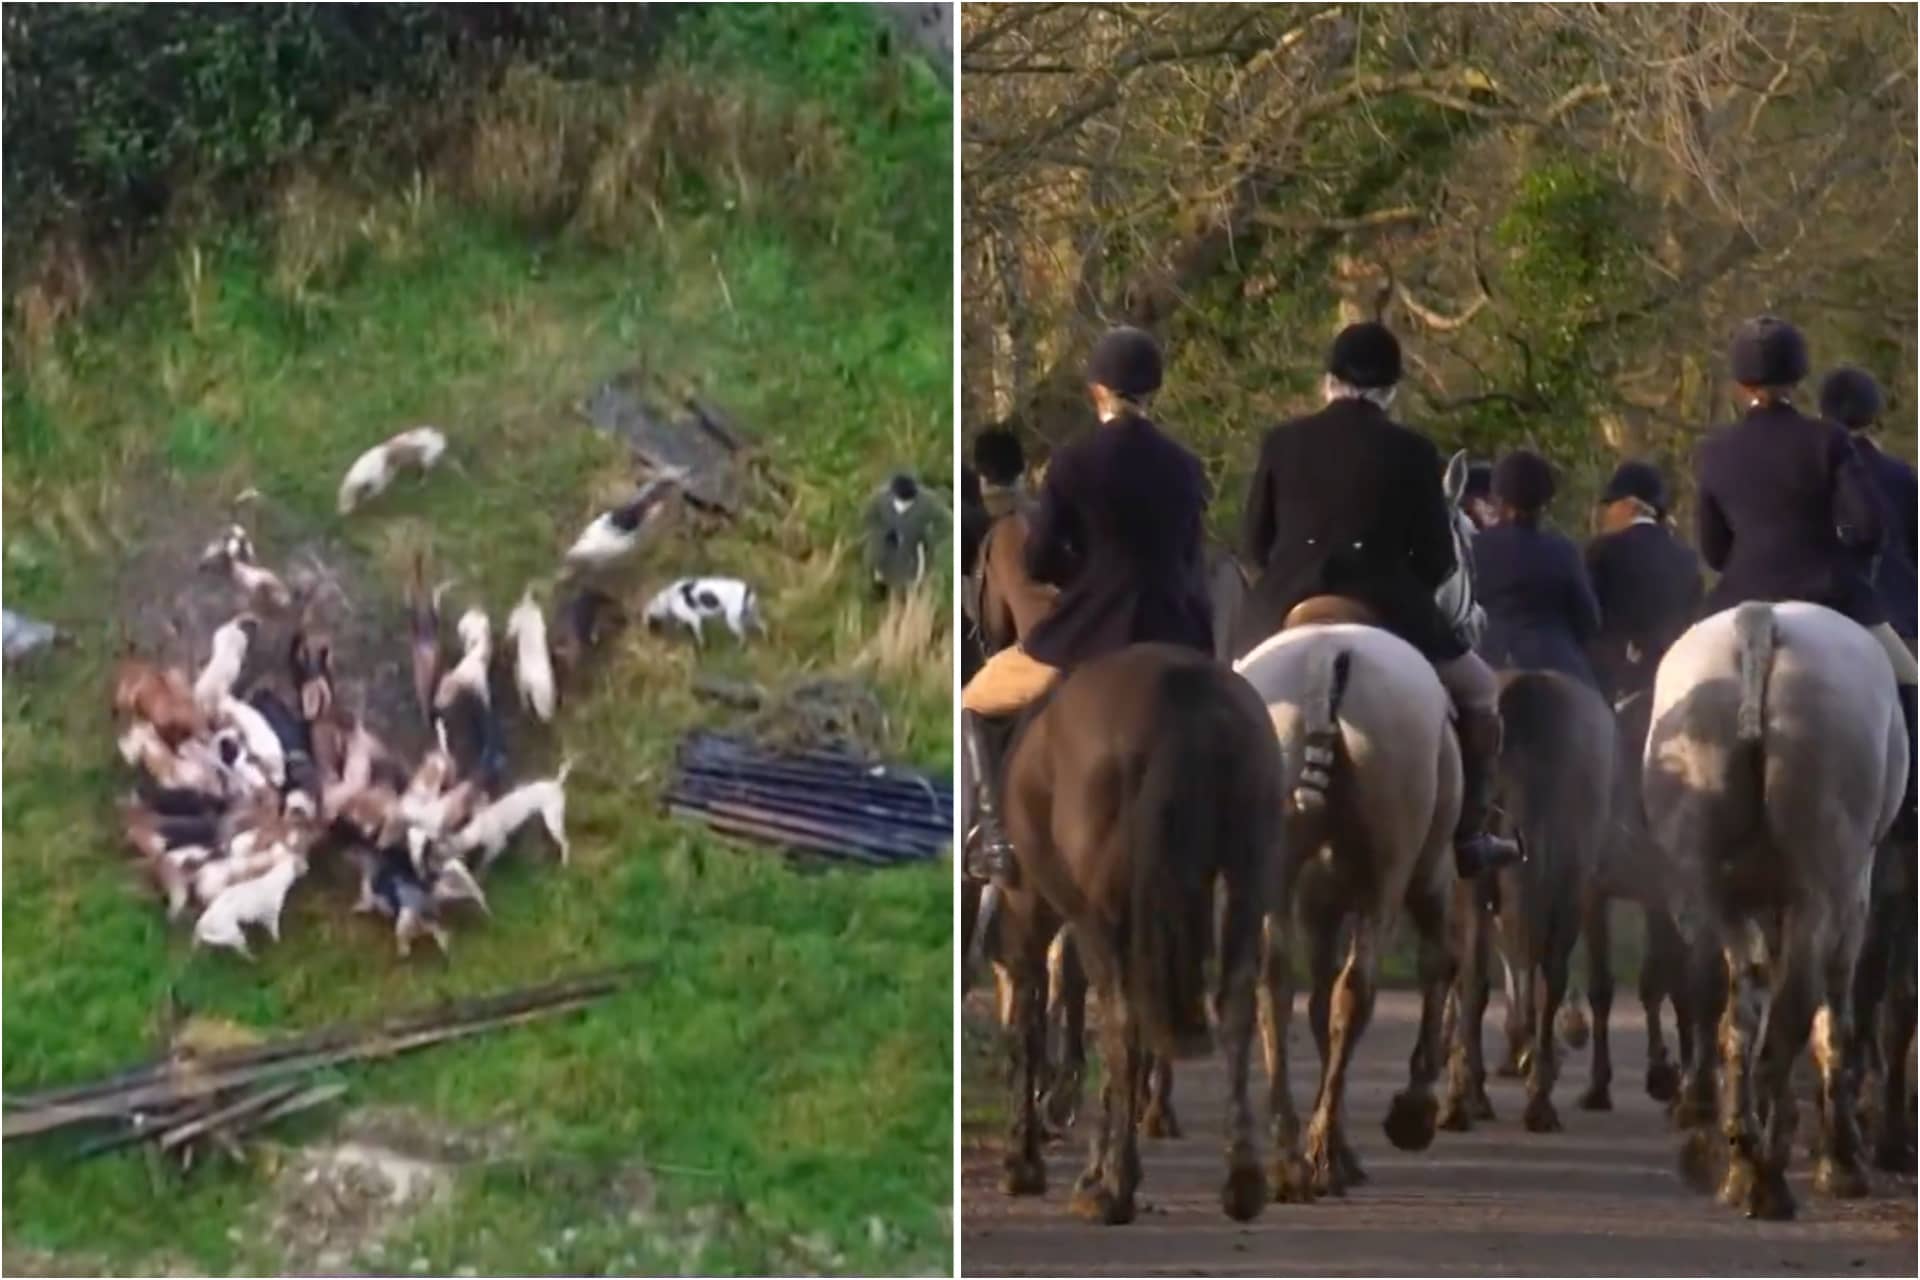 Fox hunt suspended after Channel 4 drone exposes shocking footage